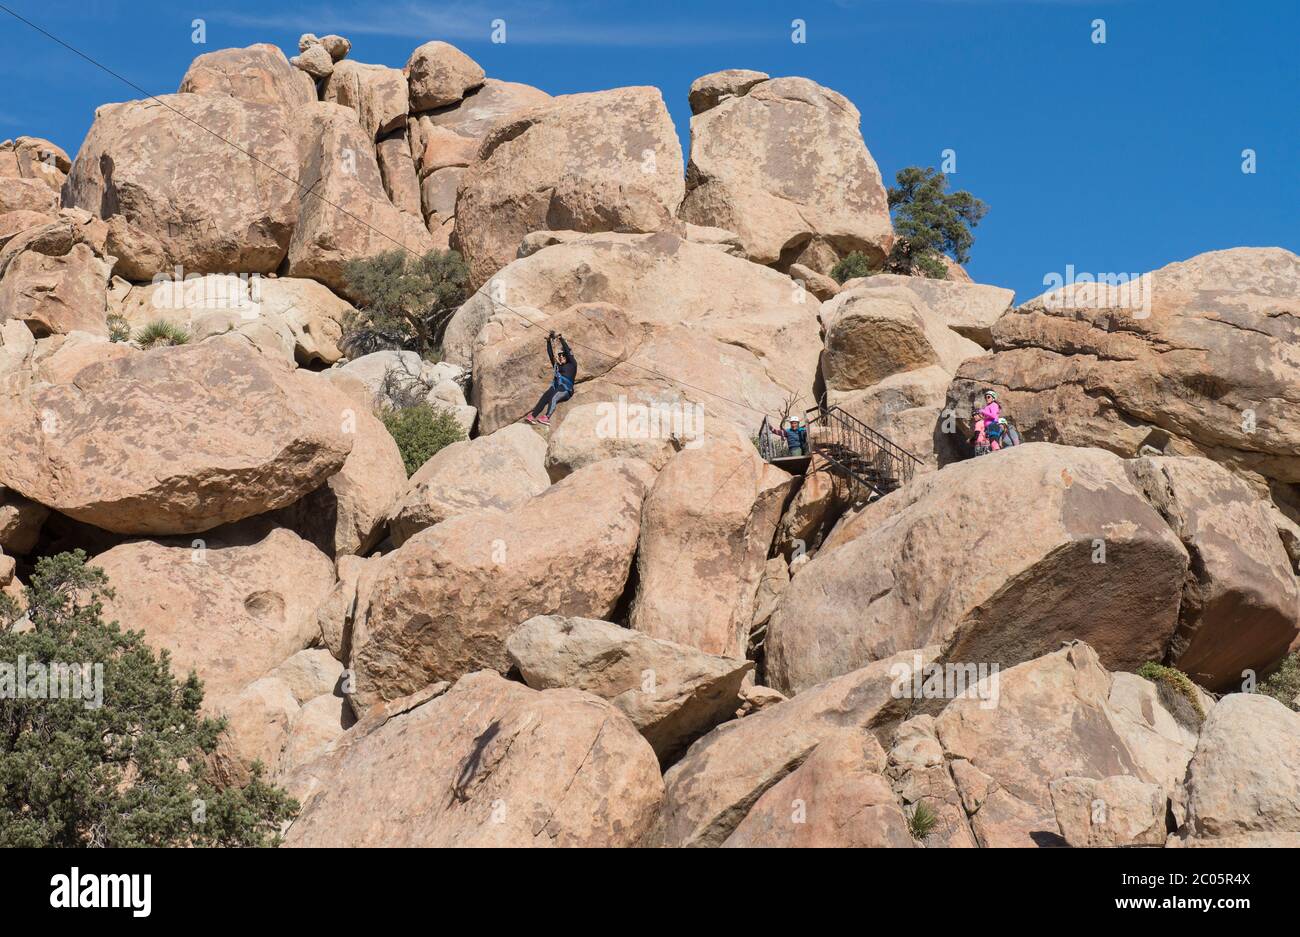 People in the mountains enjoying a zip line in La Rumorosa mountains, as part of a lifestyle and extreme sports concept. Baja California, Mexico. Stock Photo